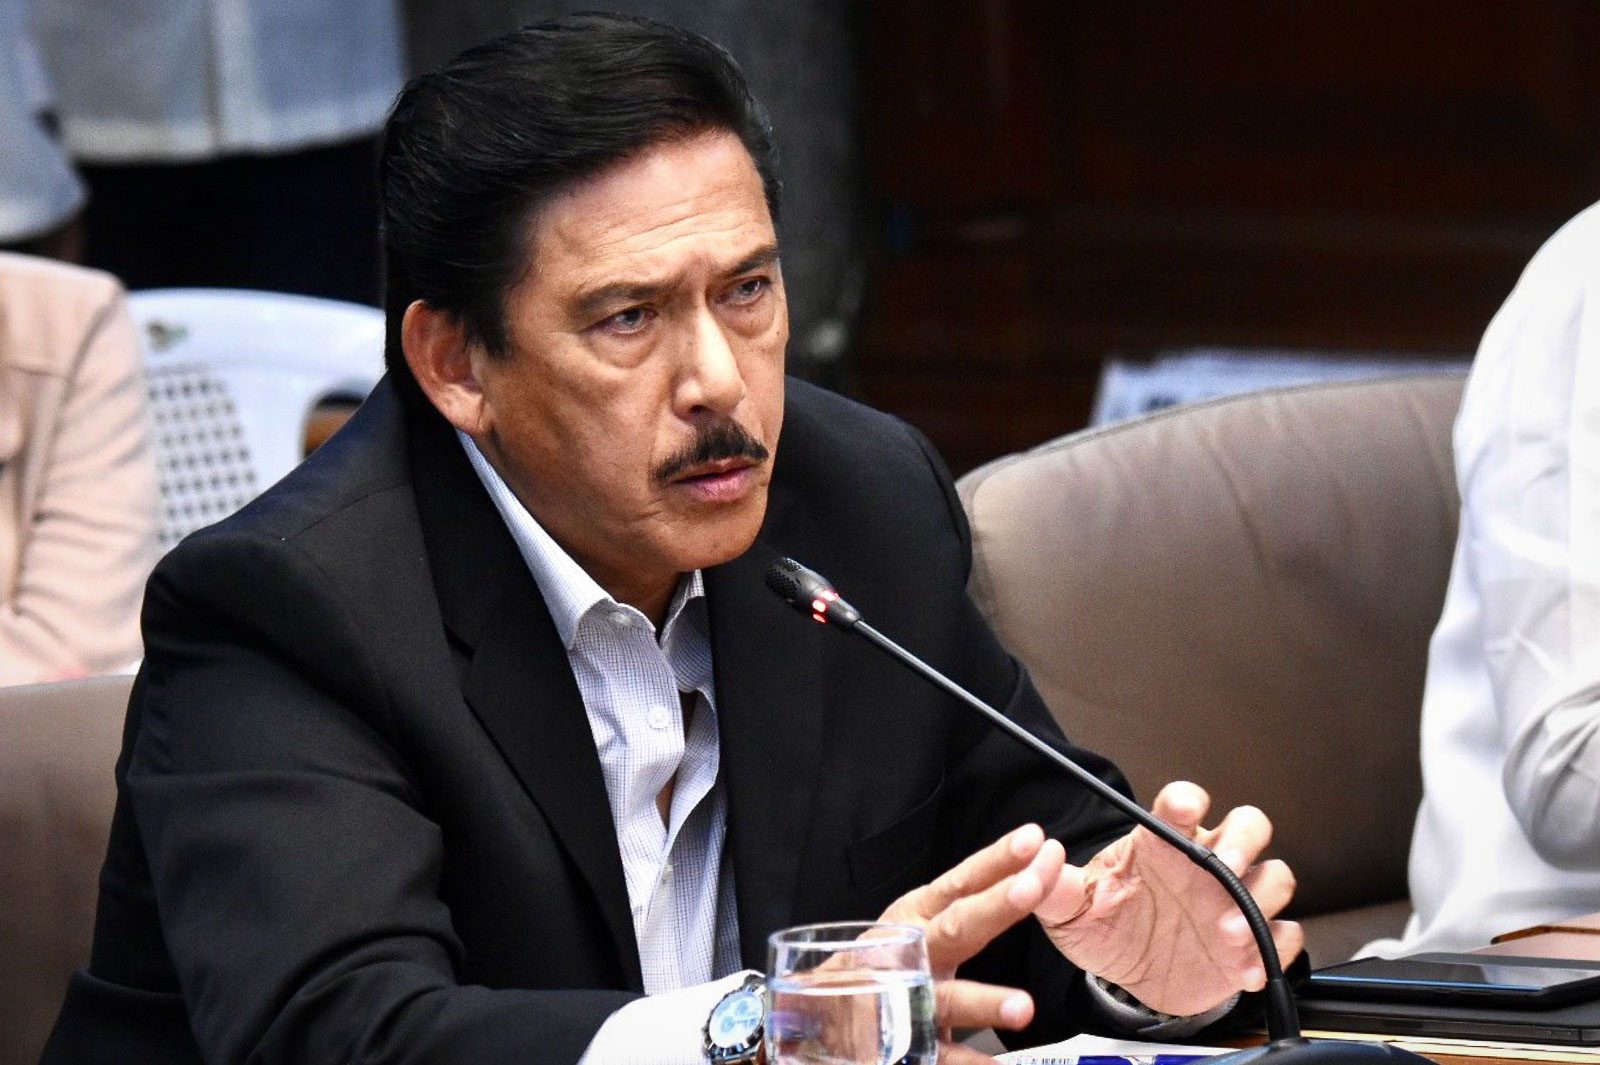 Despite SC ruling, Sotto insists on jailing suspects in drug cases under review